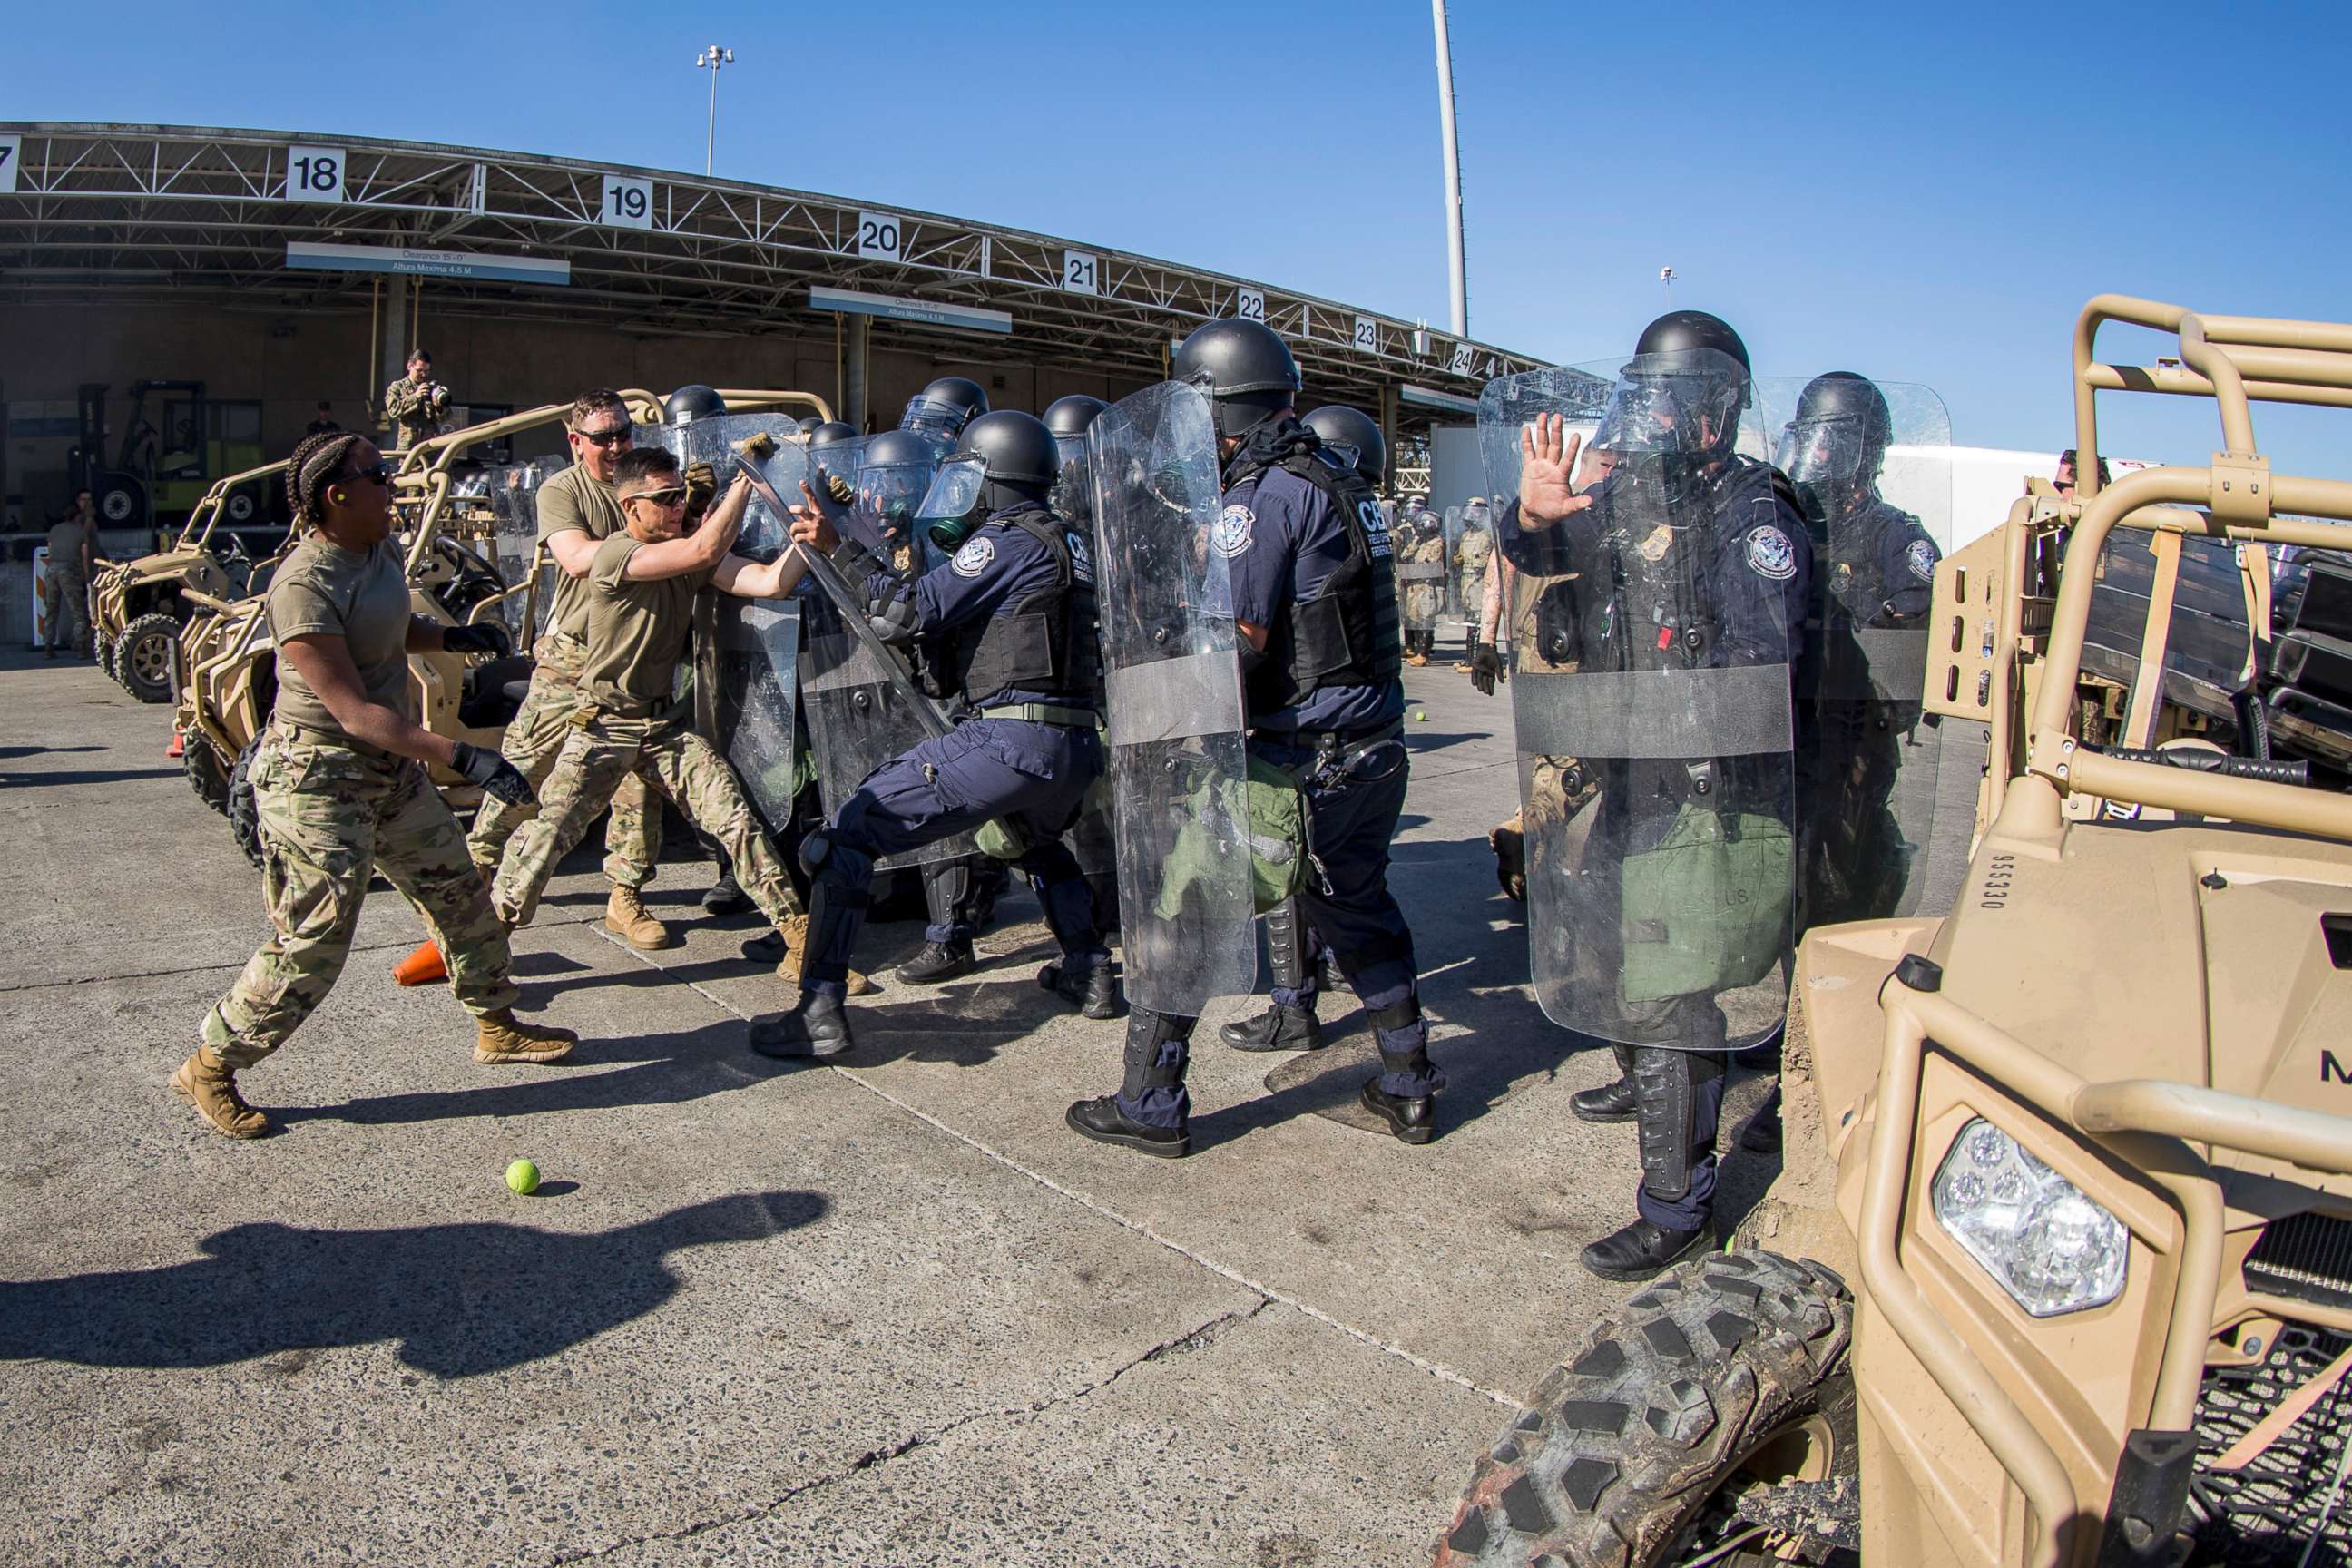 PHOTO: U.S. Soldiers with 93rd Military Police Battalion, Special Purpose Marine Air-Ground Task Force 7, simulate resistance during civil disturbance training with U.S. Customs and Border Protection (CBP) at the Otay Mesa Port of Entry, Dec. 16, 2018.